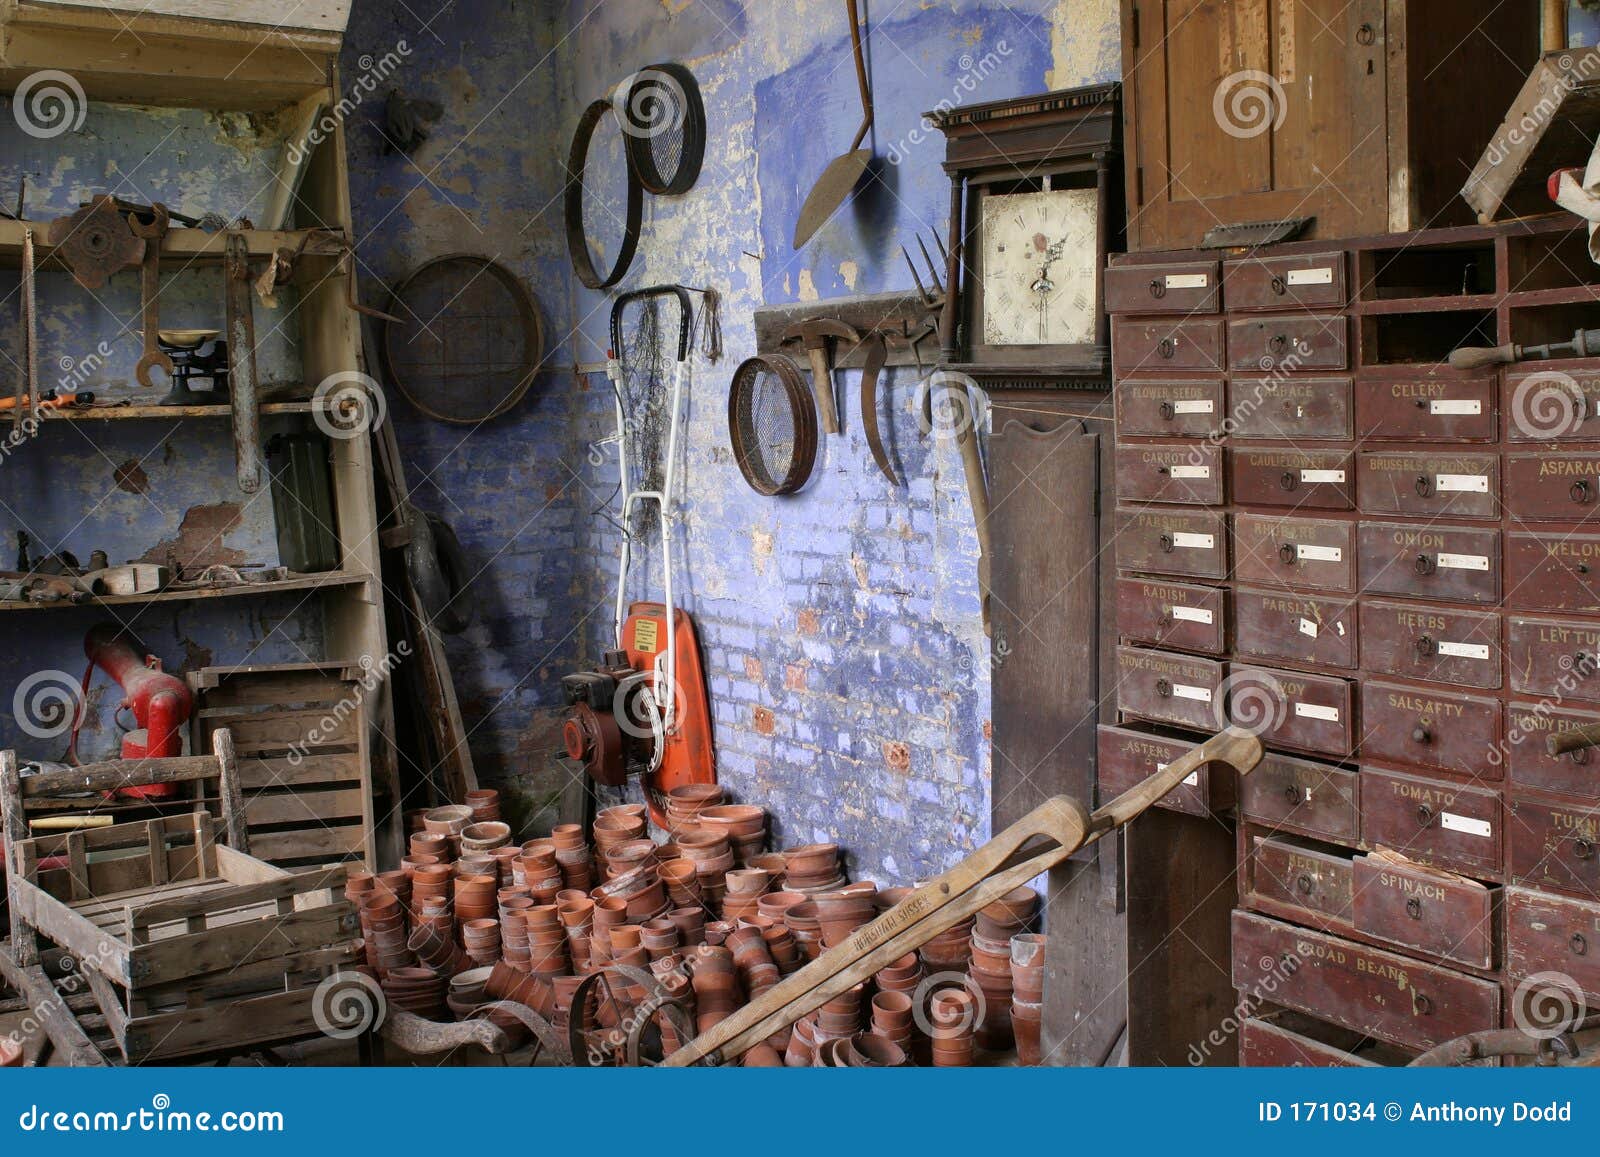 The Old Potting Shed Stock Images - Image: 171034